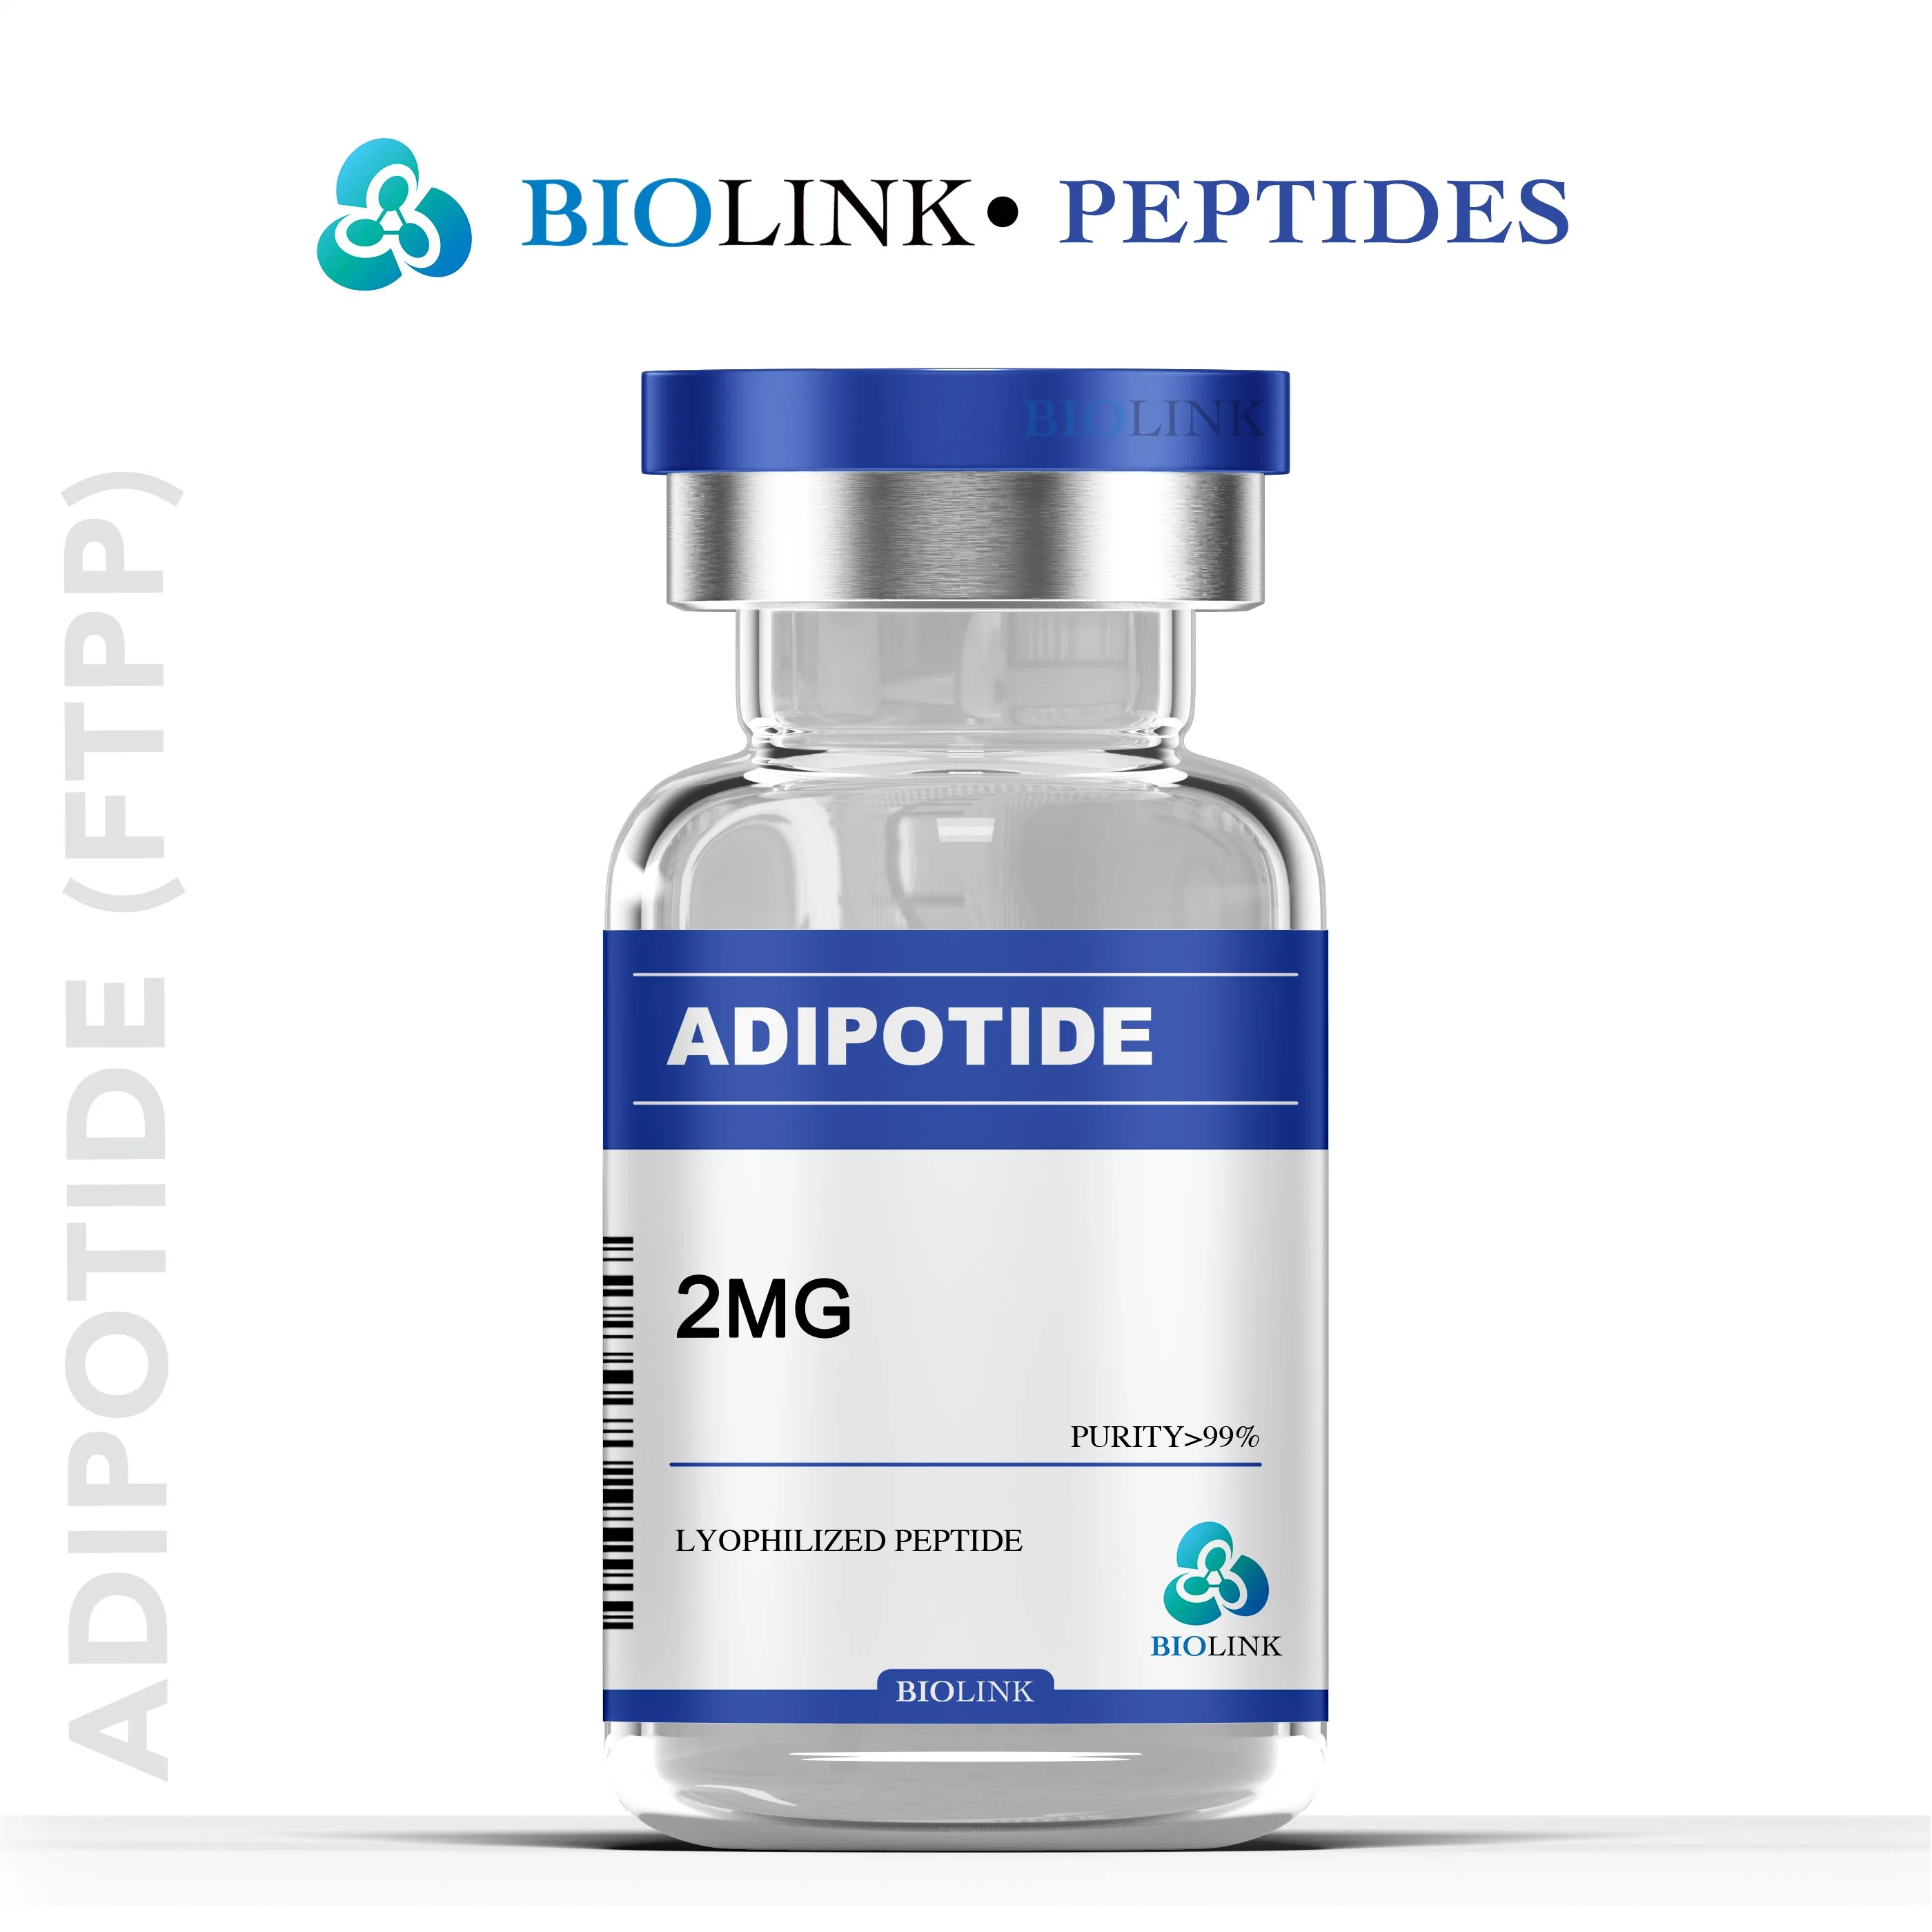 GLP-1 Peptides Mounjaro 5mg 10mg 15mg Tirzepatide Lyophilized Injection Peptides Factory Wholesale/Suppliers CAS: 2023788-19-2